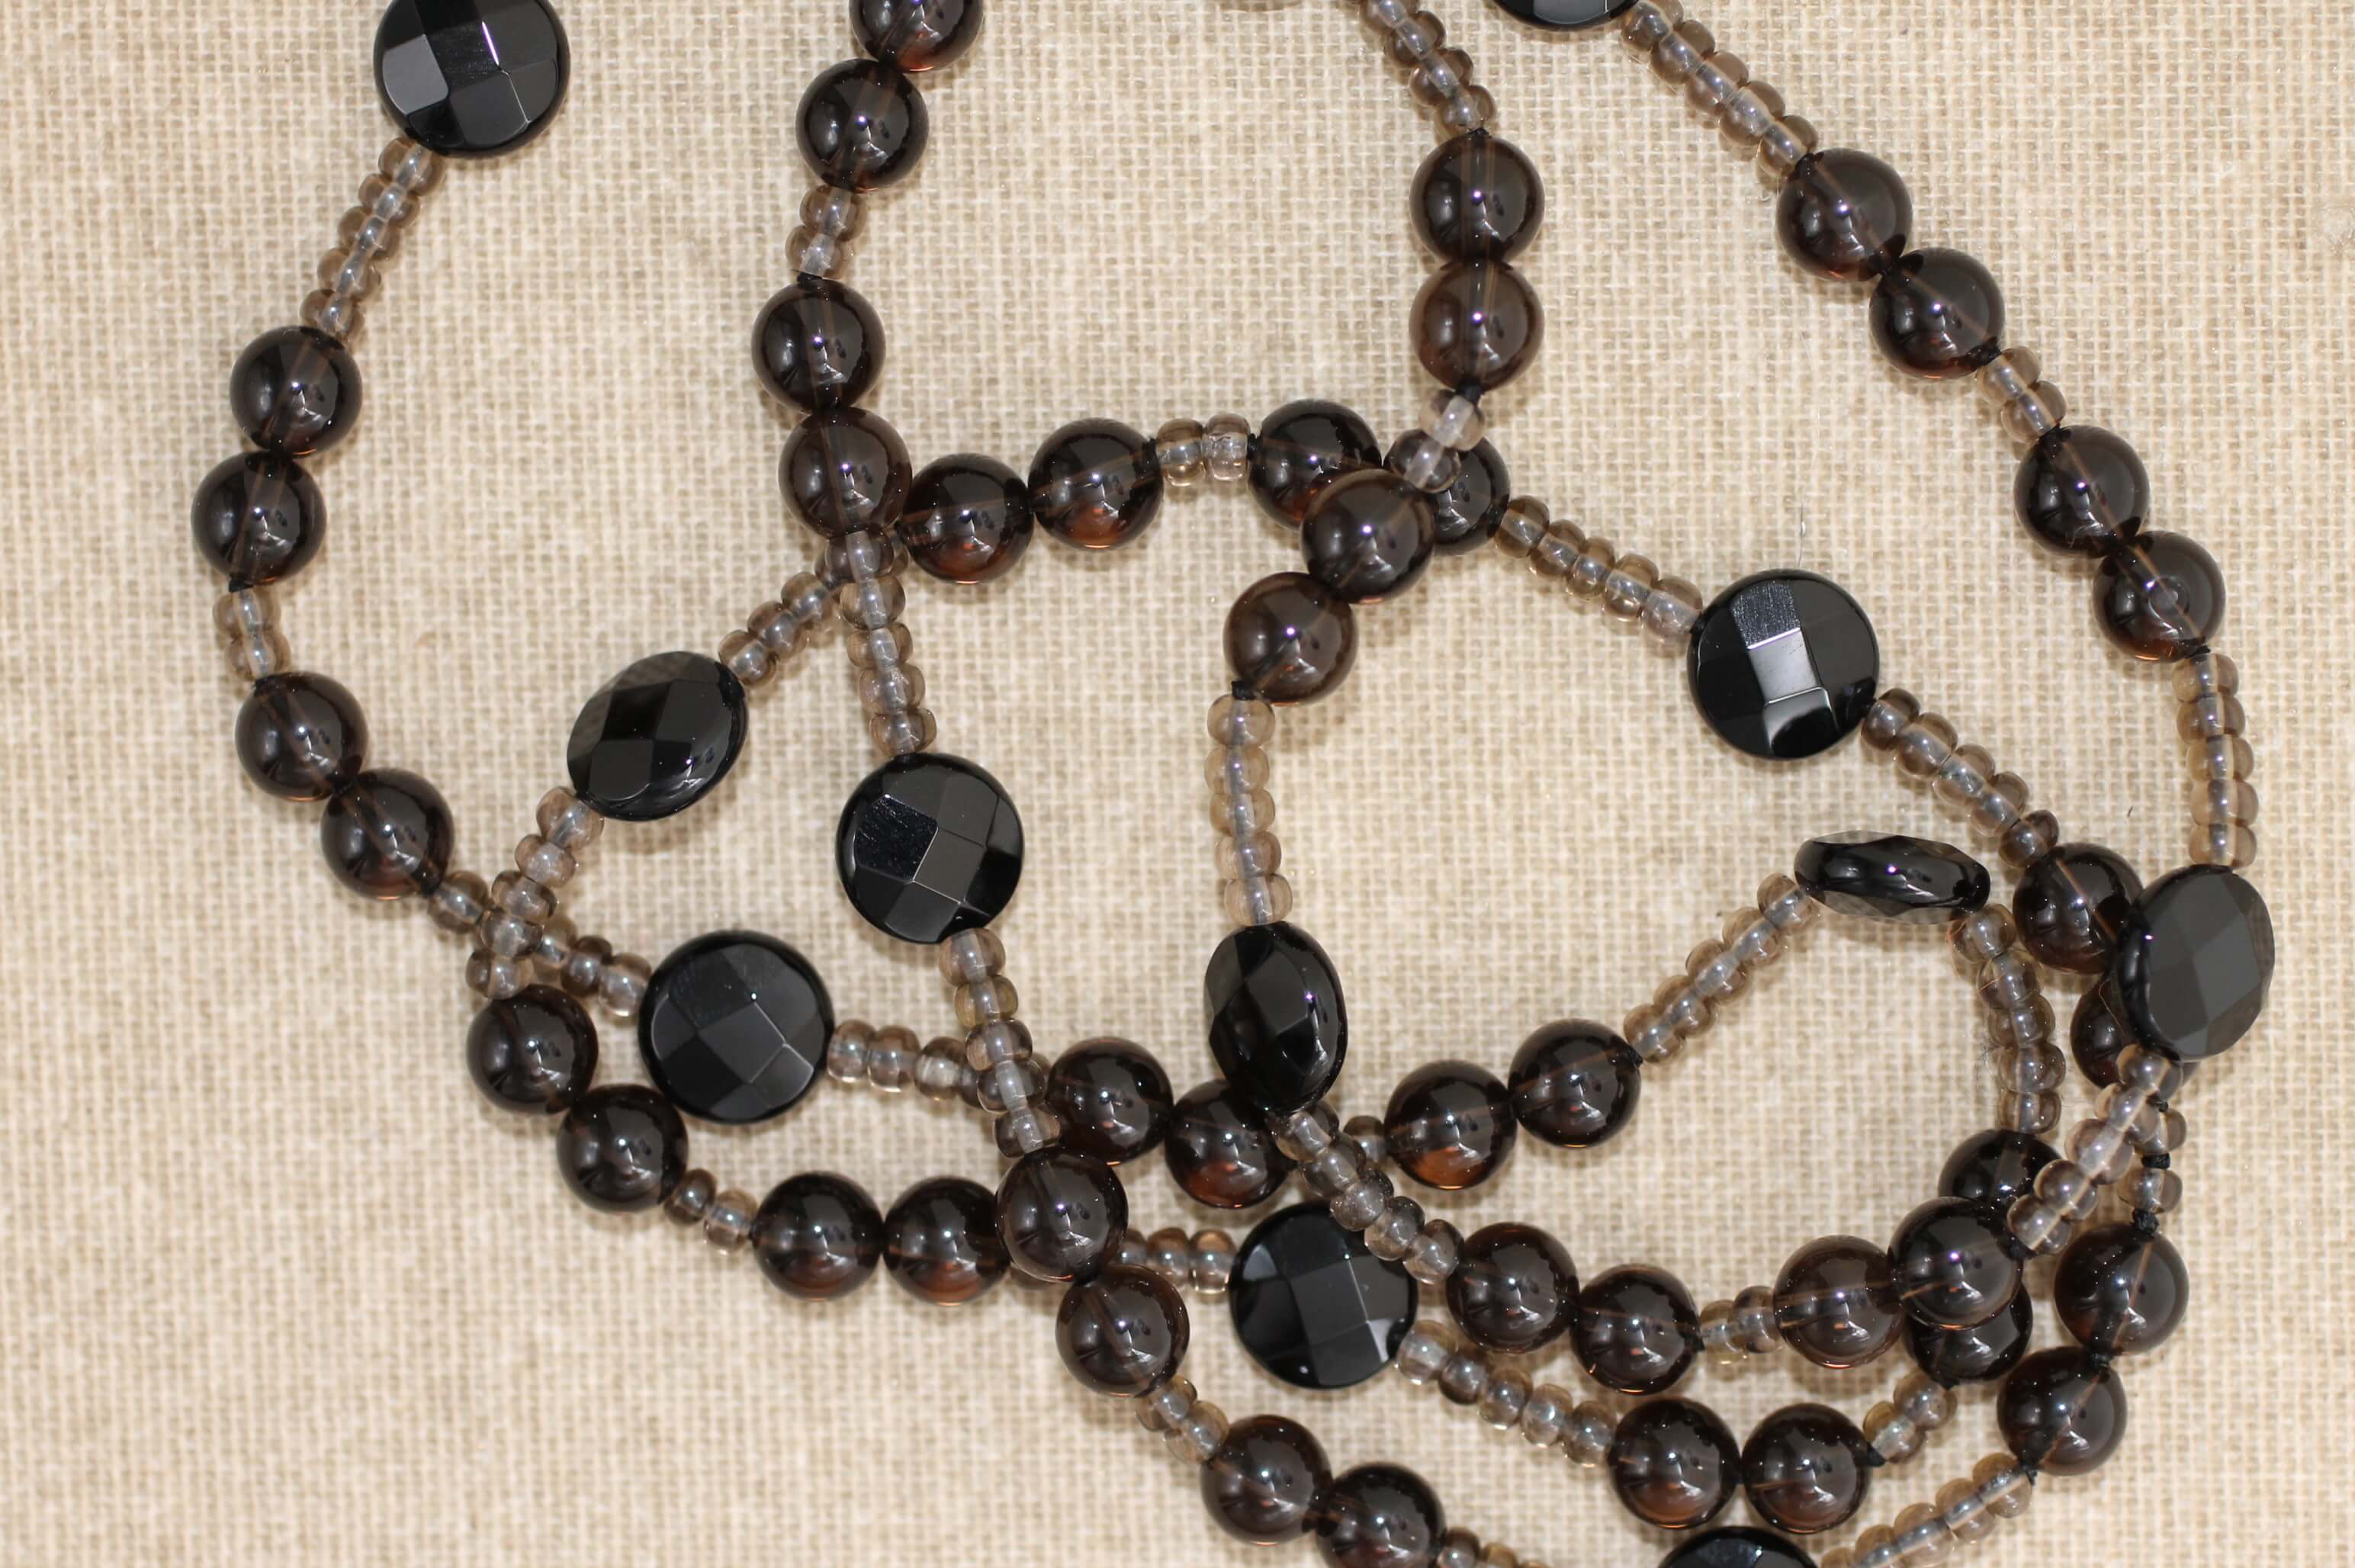 Faceted Onyx and Smoky Quartz necklace